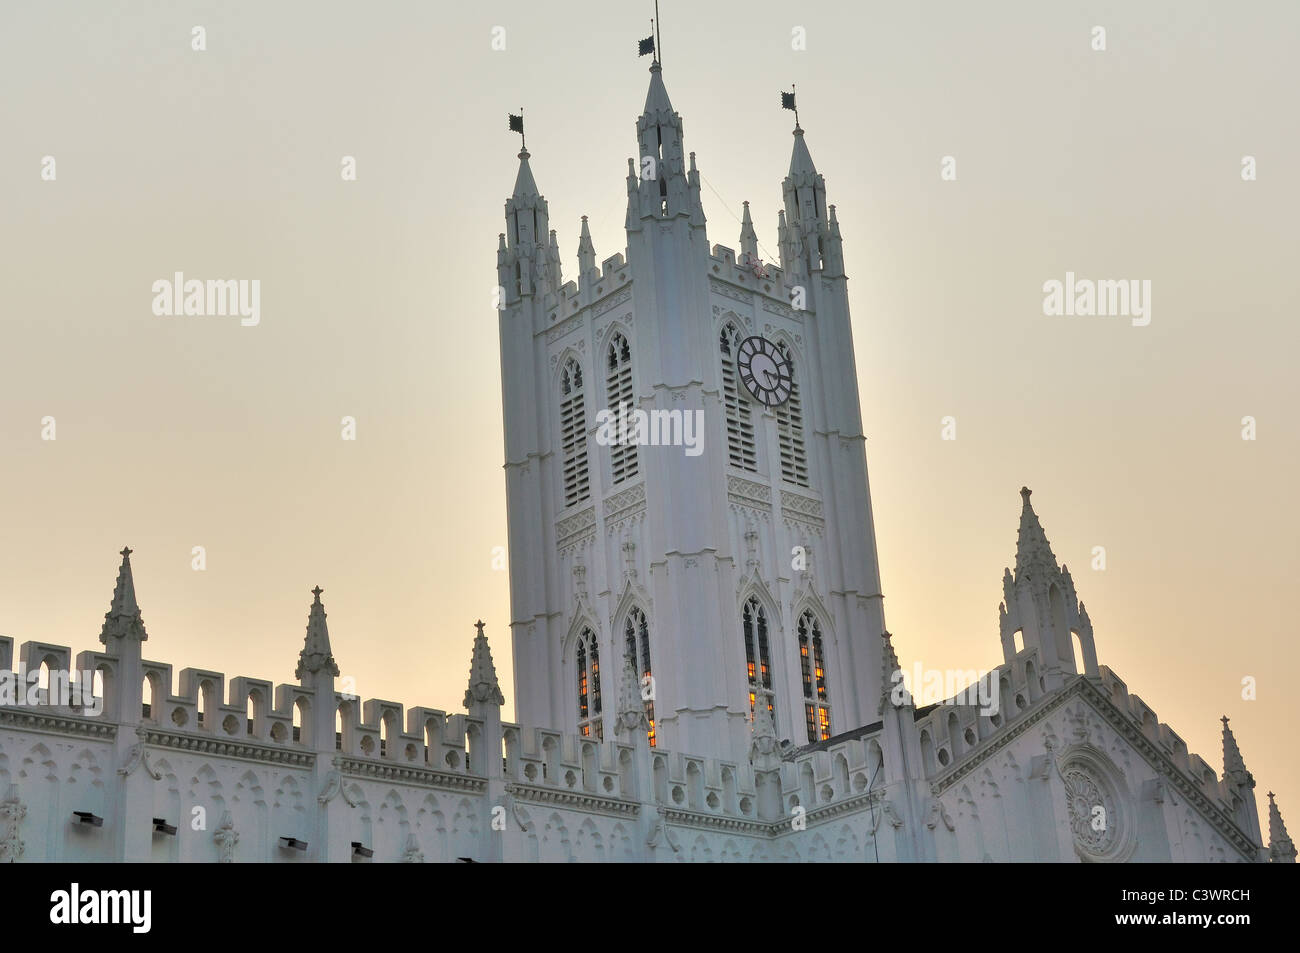 The Clock Tower of St. Paul's Cathedral, Calcutta during dusk Stock Photo